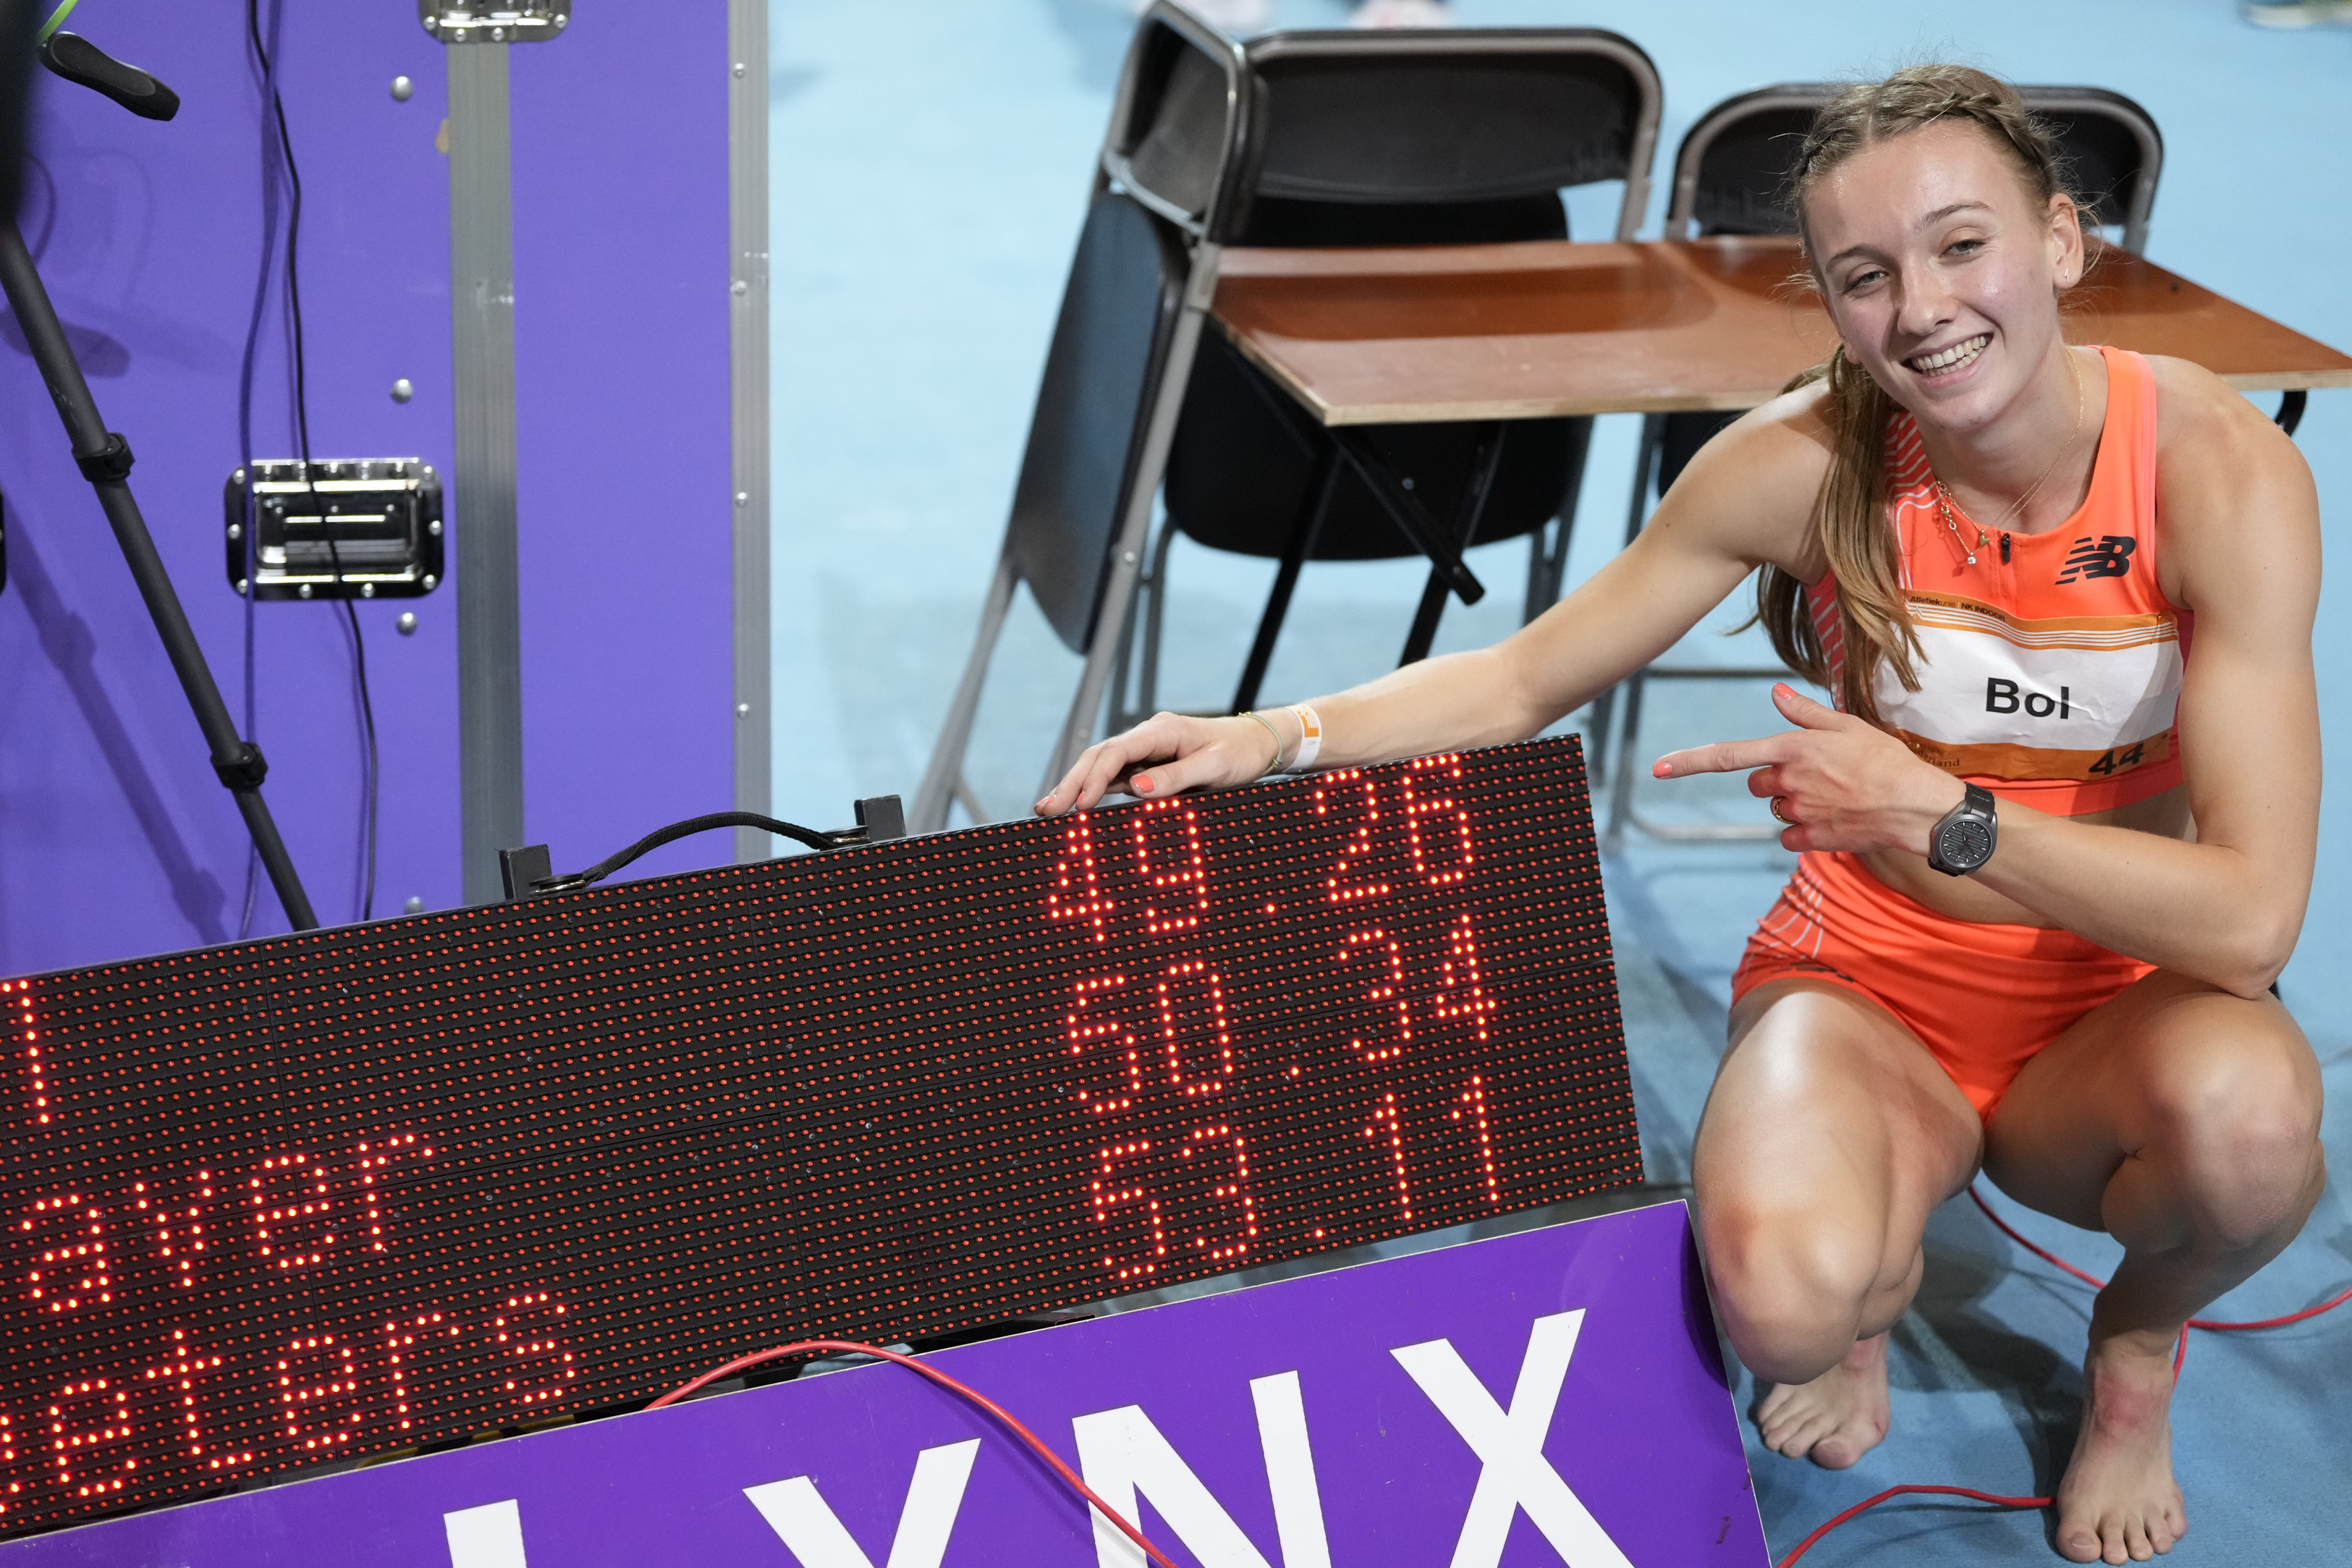 Femke Bol poses with her record of 49.26 seconds after winning the indoor women's 400-meter gold medal in the Dutch indoor championships in Apeldoorn, the Netherlands, February 19, 2023. /CFP